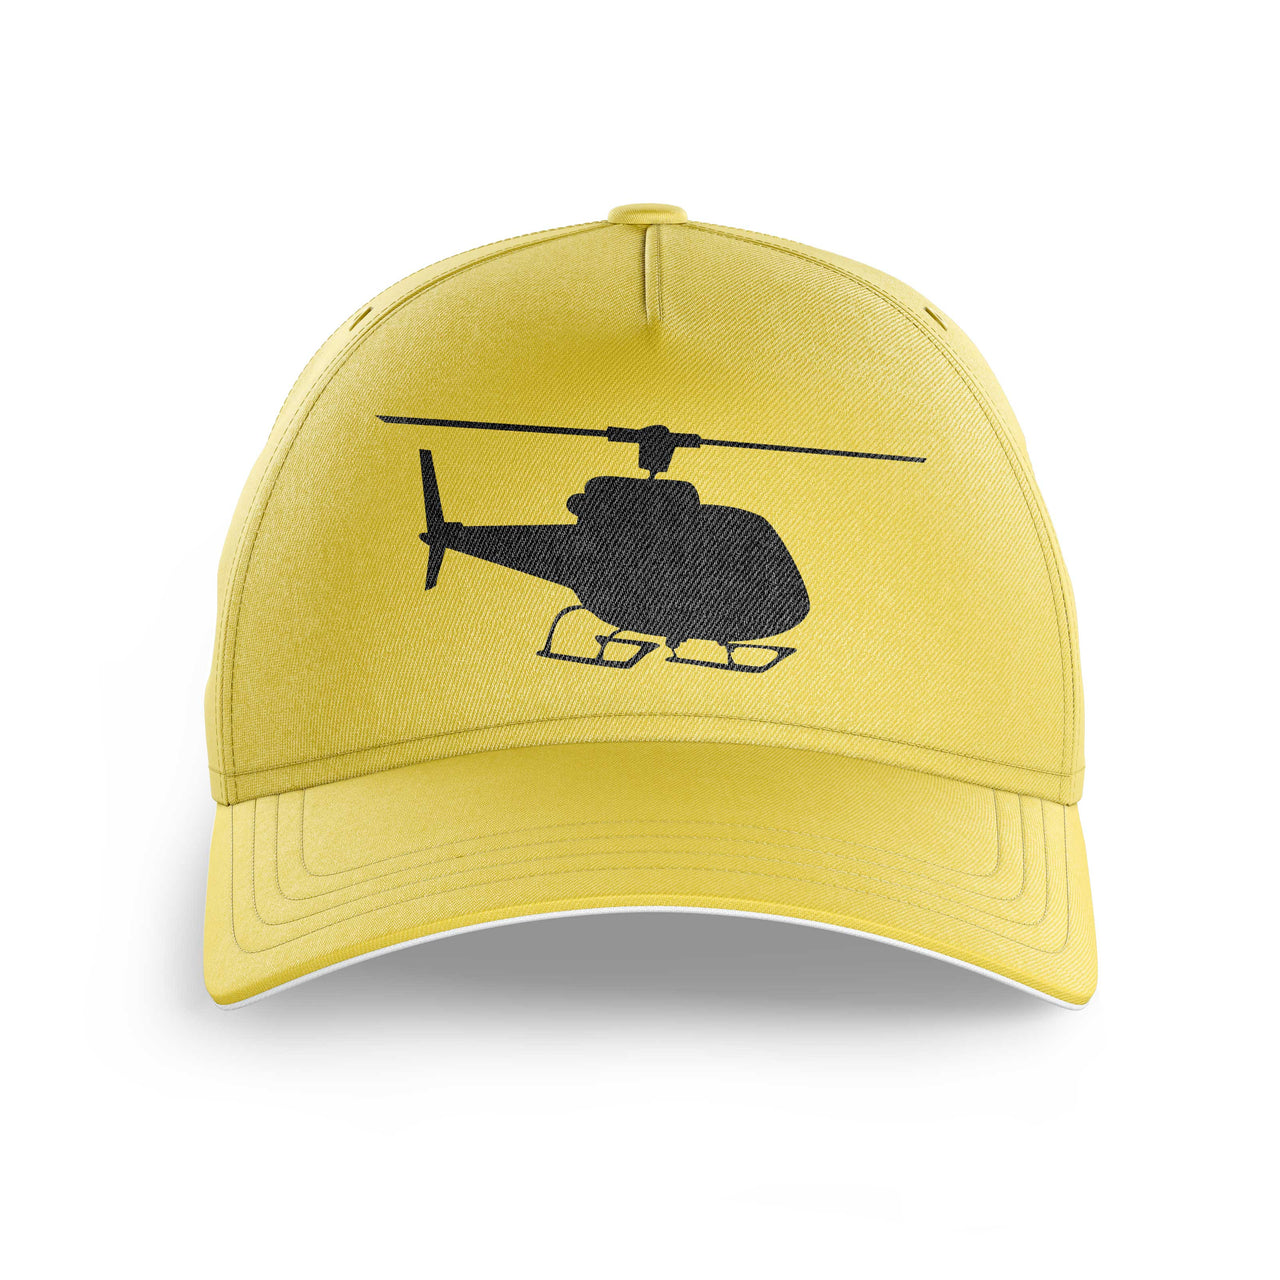 Helicopter Silhouette Printed Hats